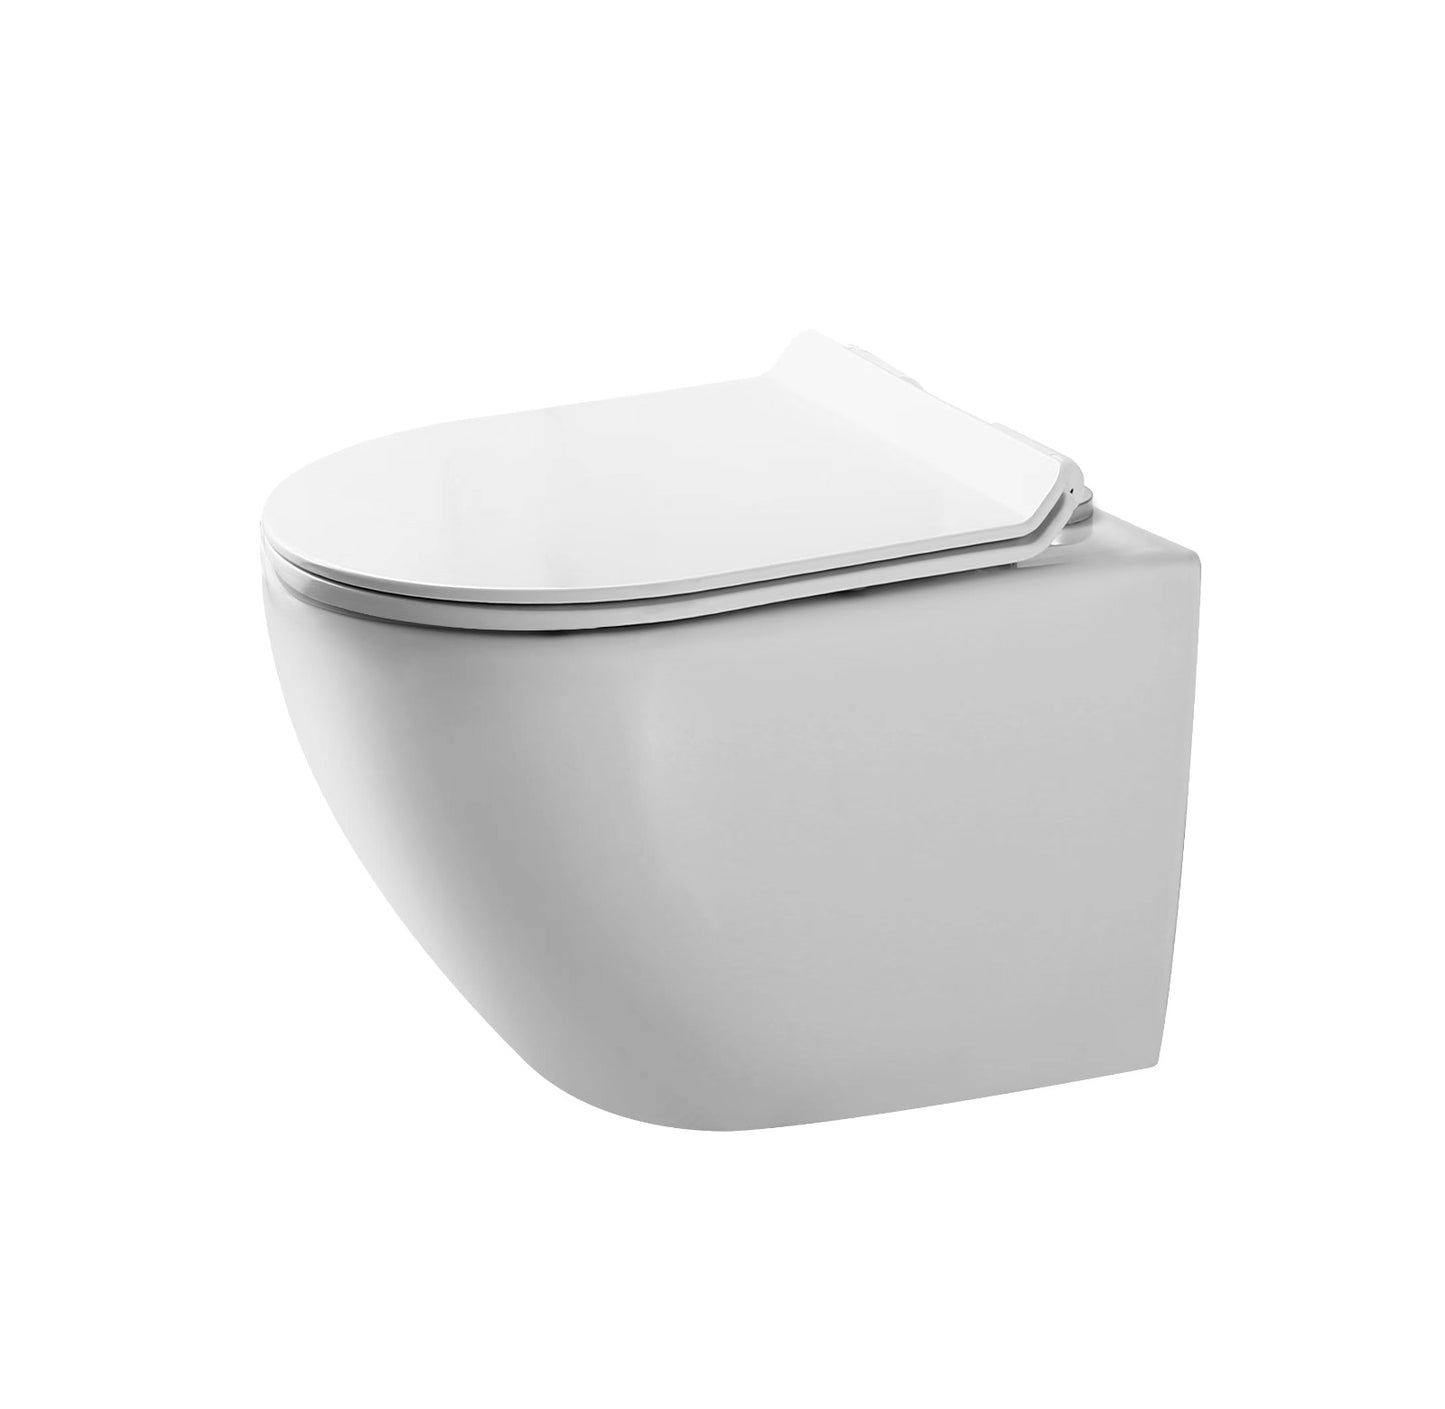 F&D Wall Hung Toilet 6007-Wh